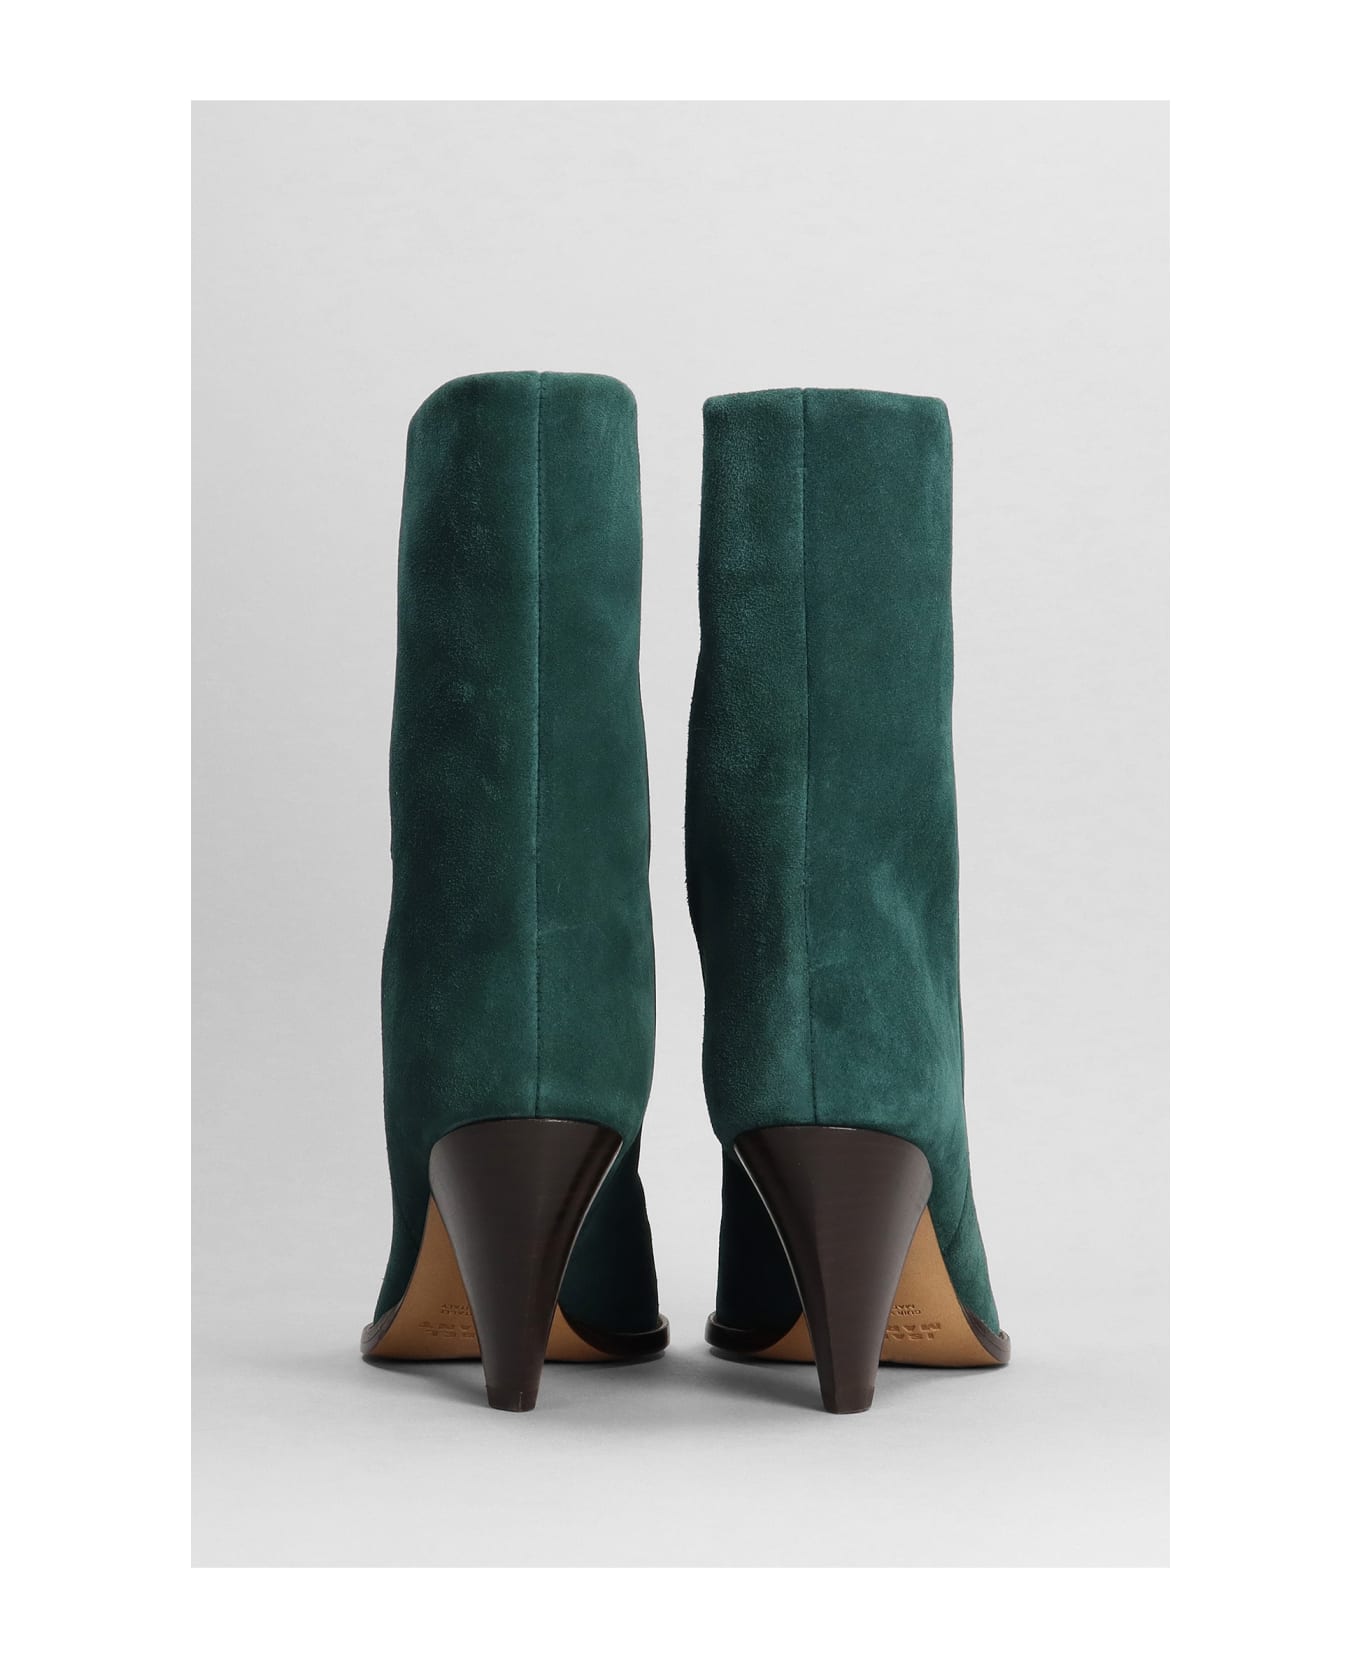 Isabel Marant Rouxa High Heels Ankle Boots - green